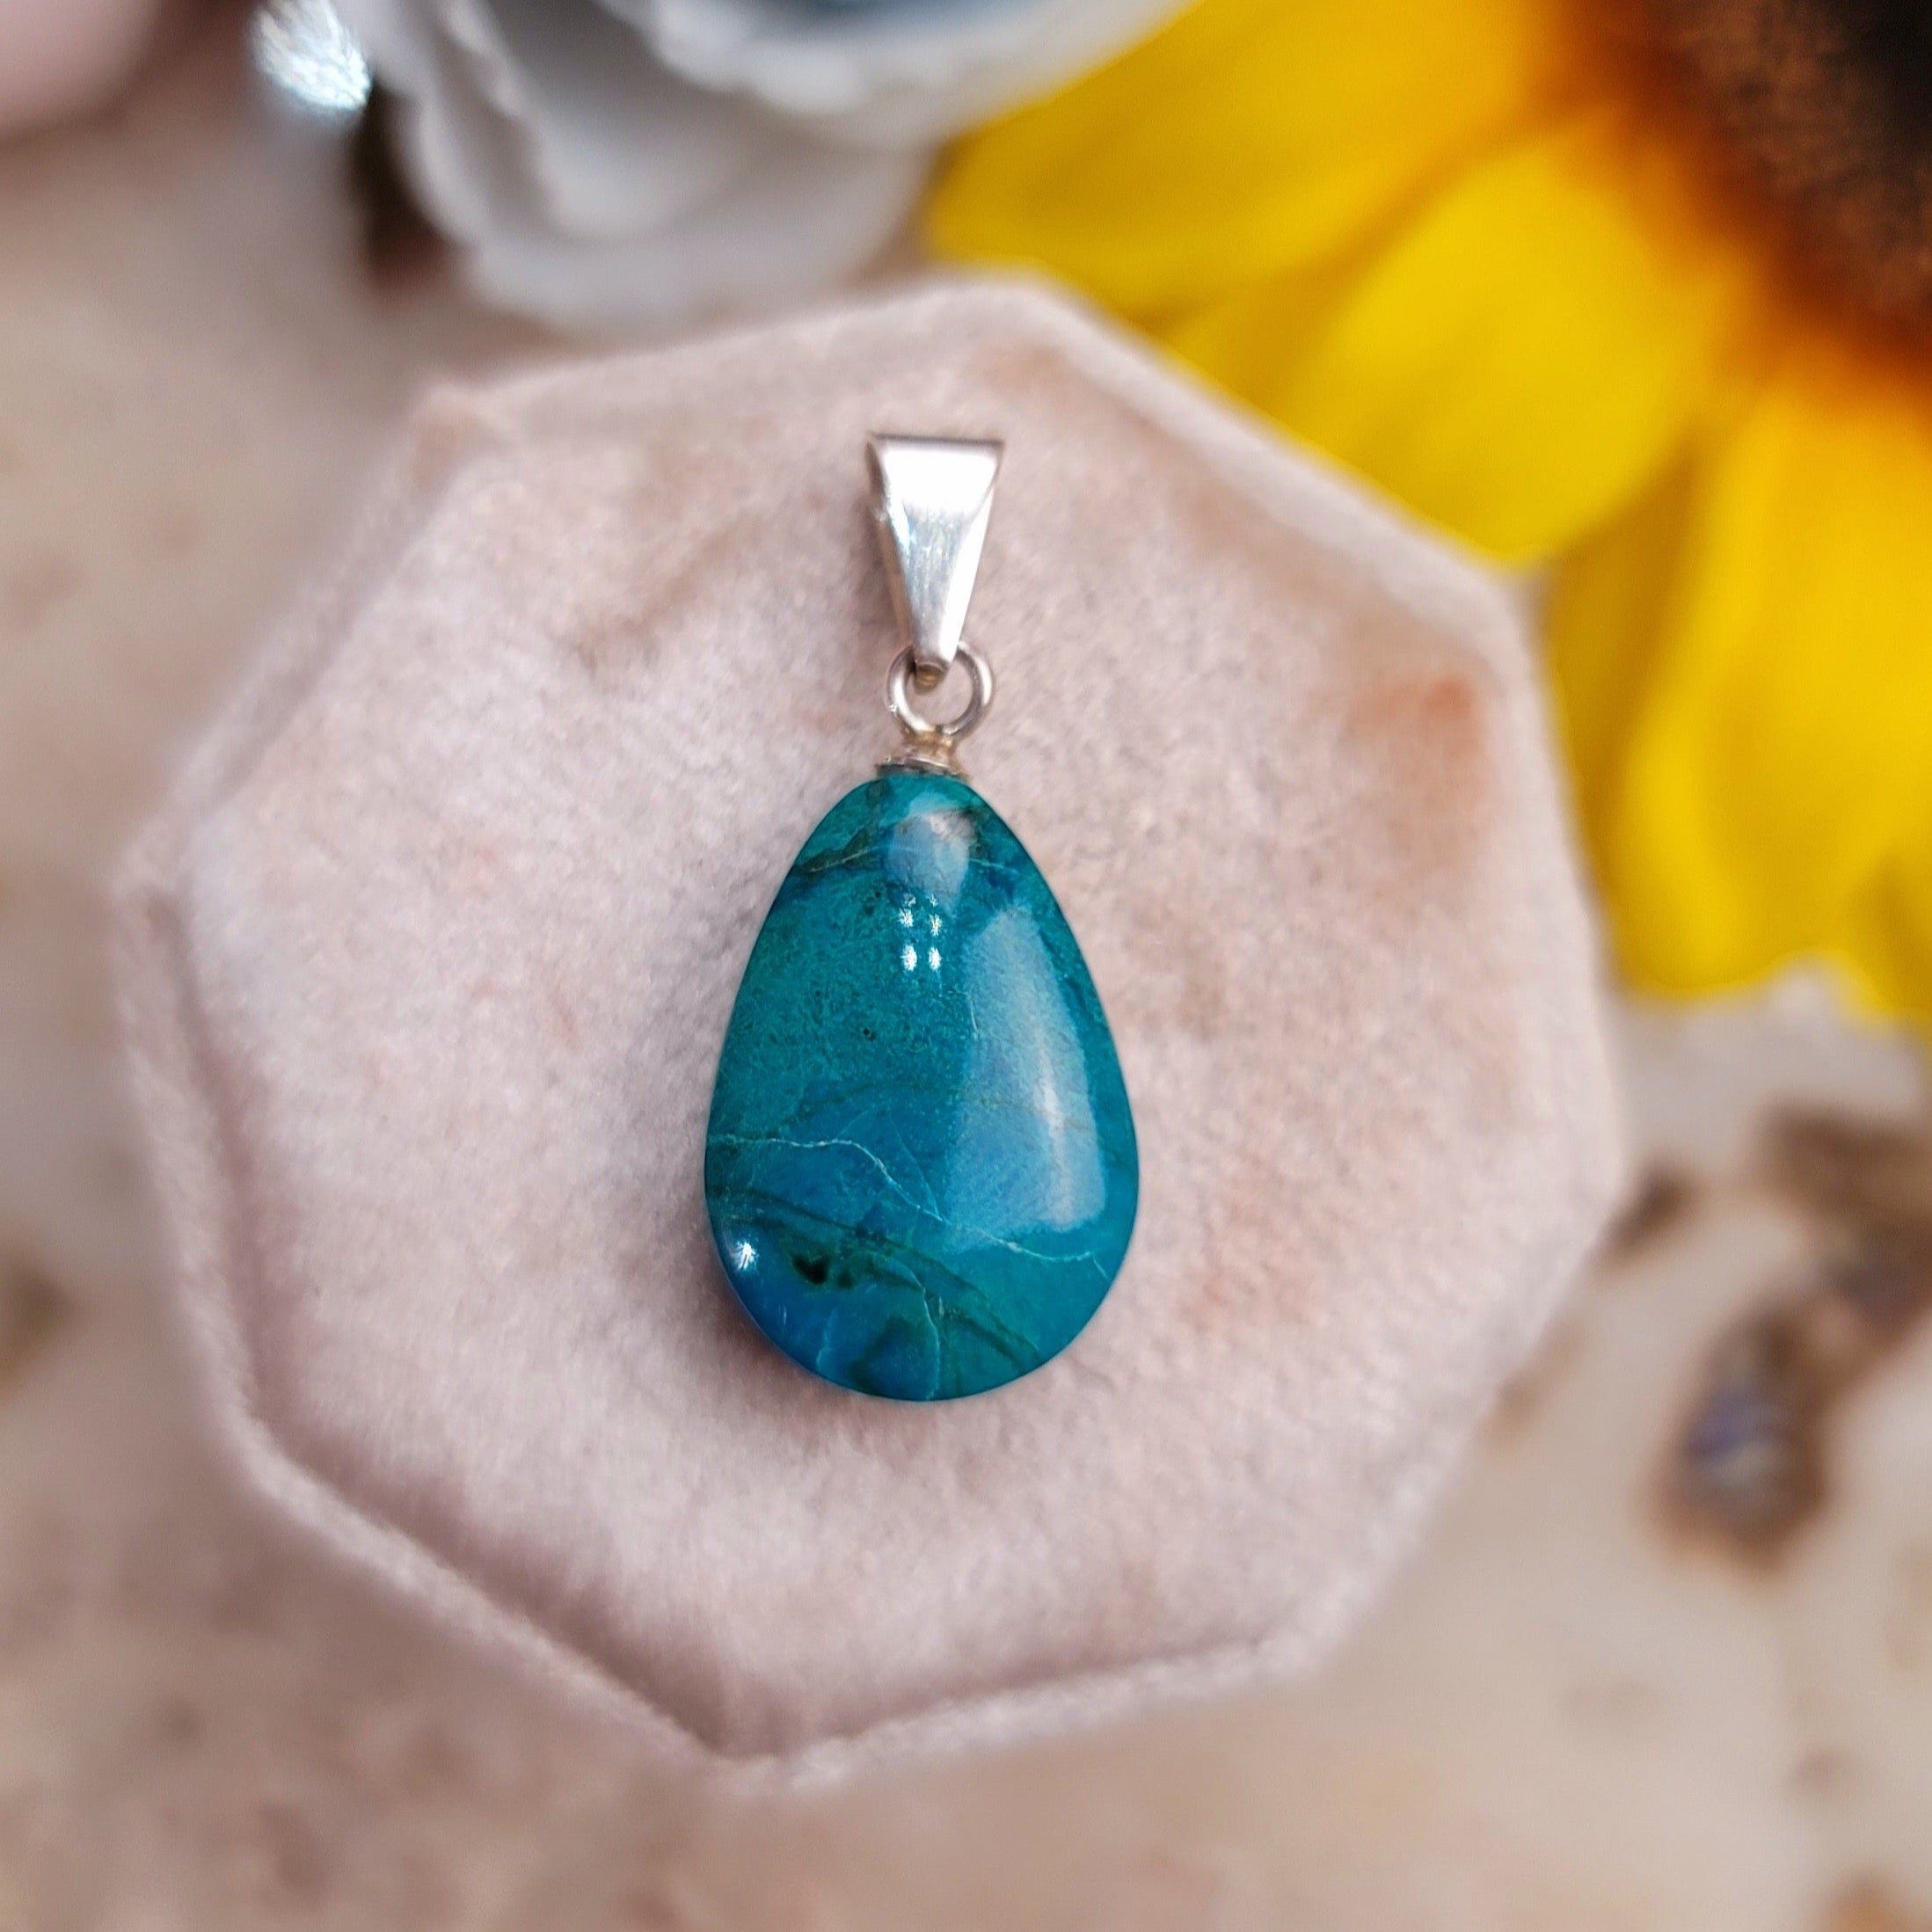 Chrysocolla & Malachite Drilled Pendant for Empowerment and Transformation